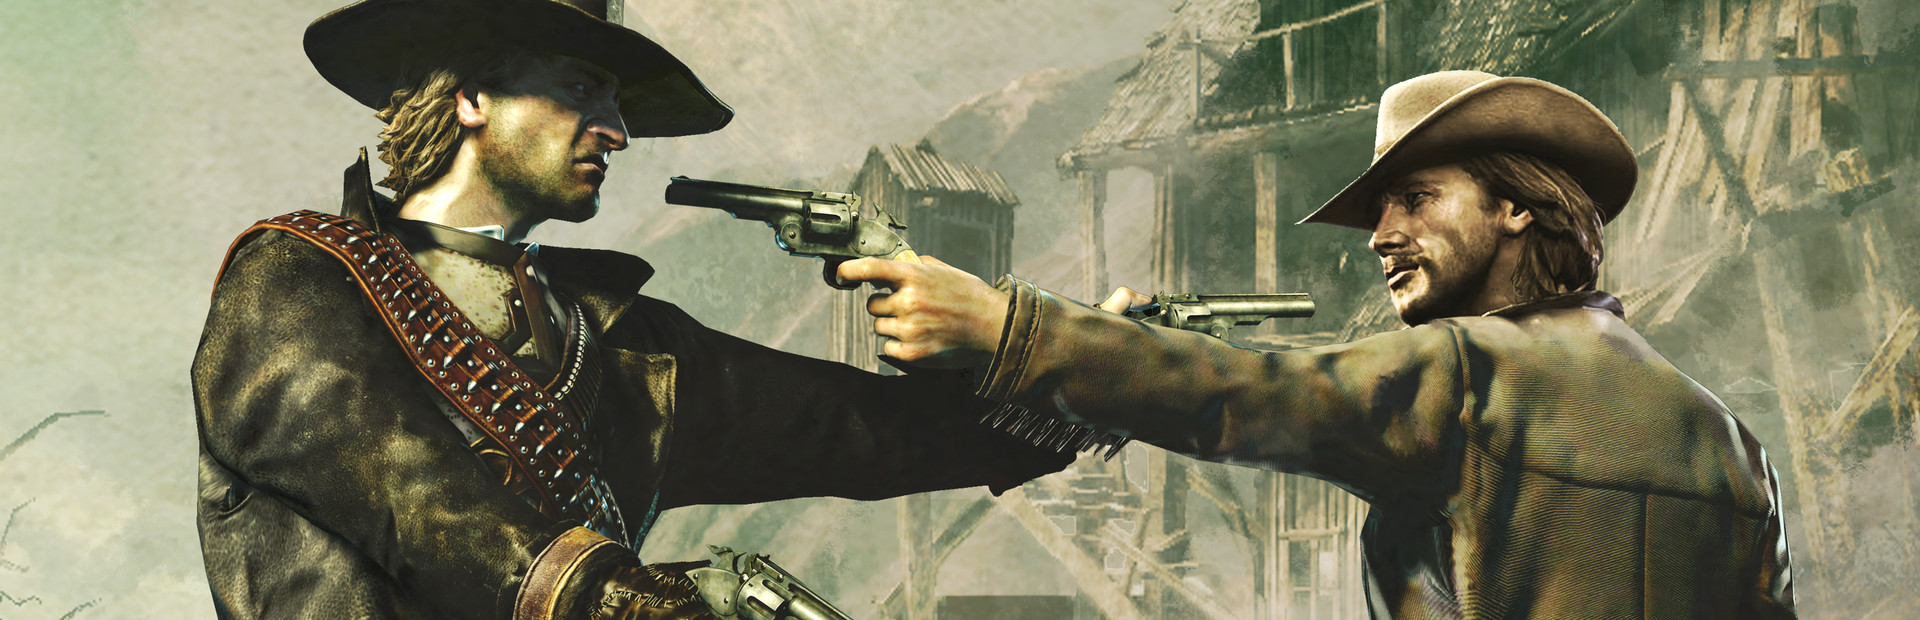 Call of Juarez: Bound in Blood cover image